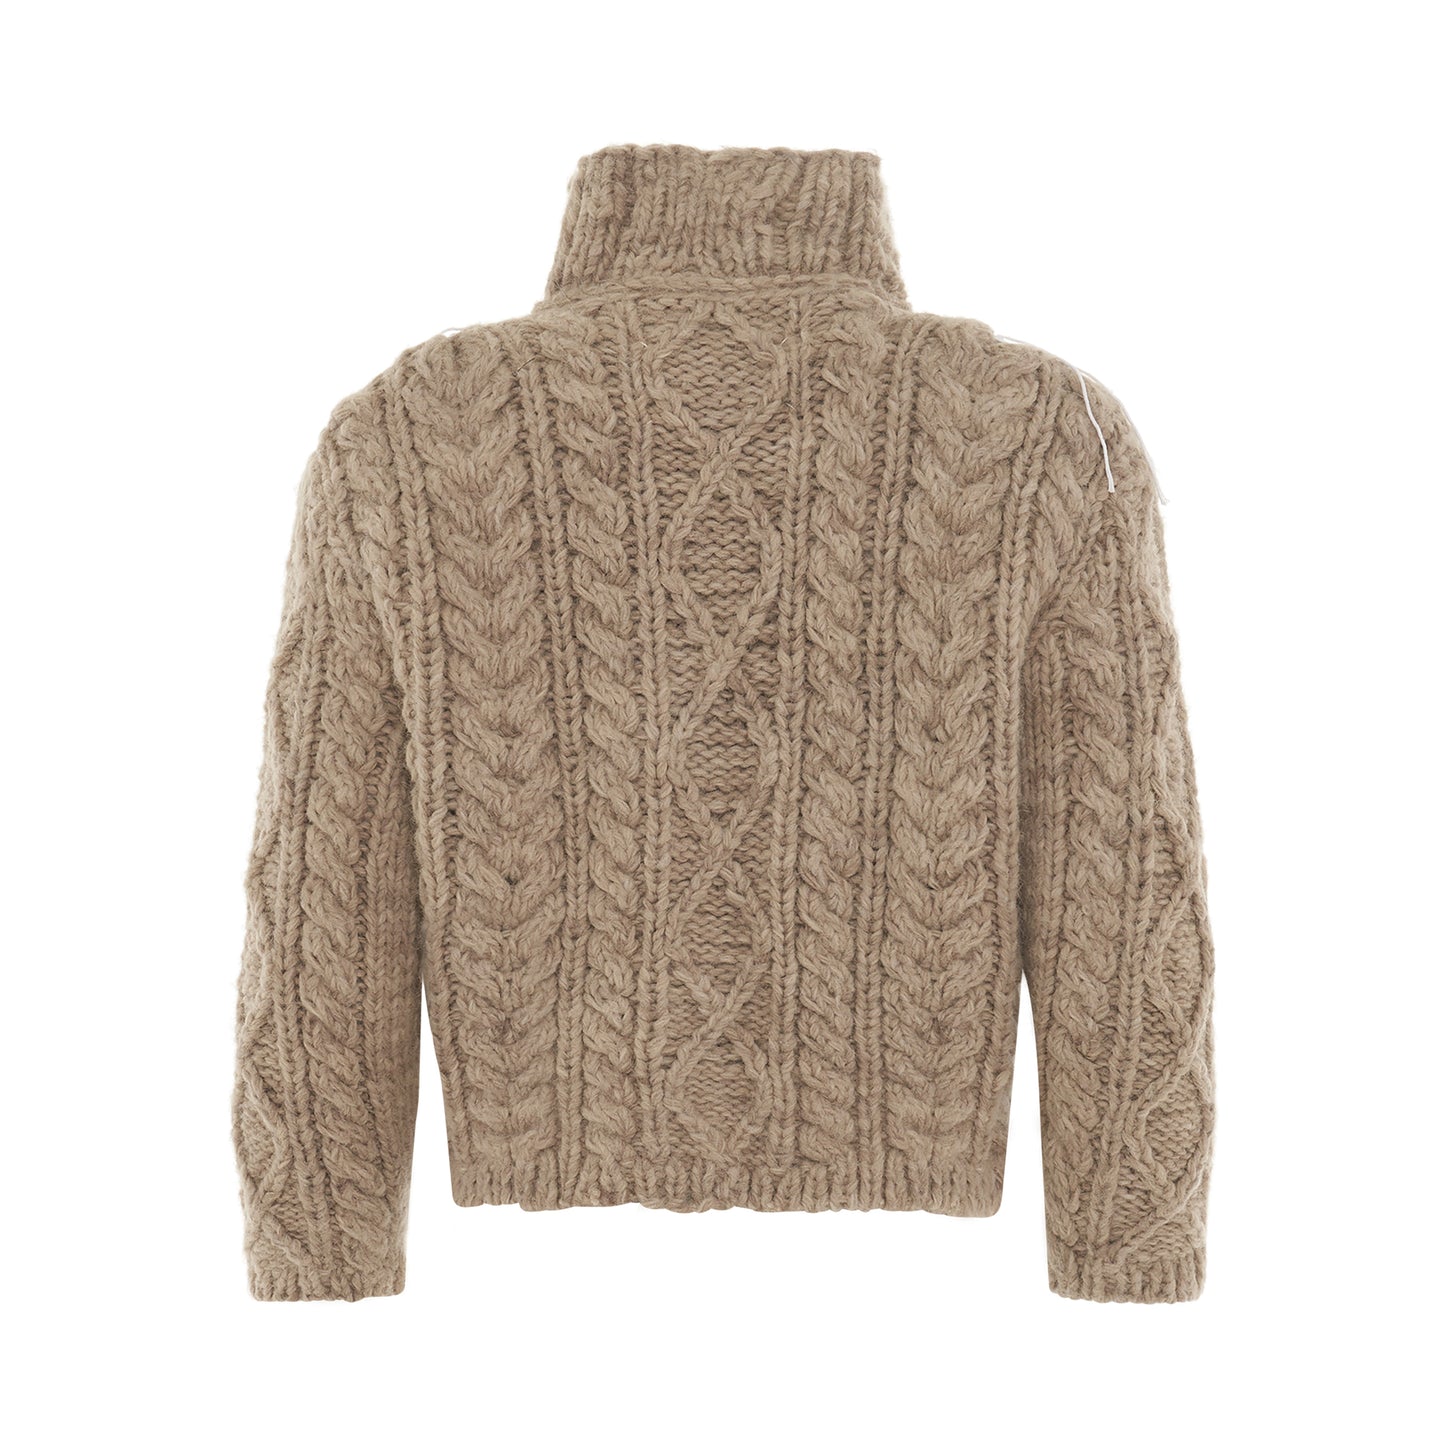 Cropped Cable Knit Cardigan in Bark